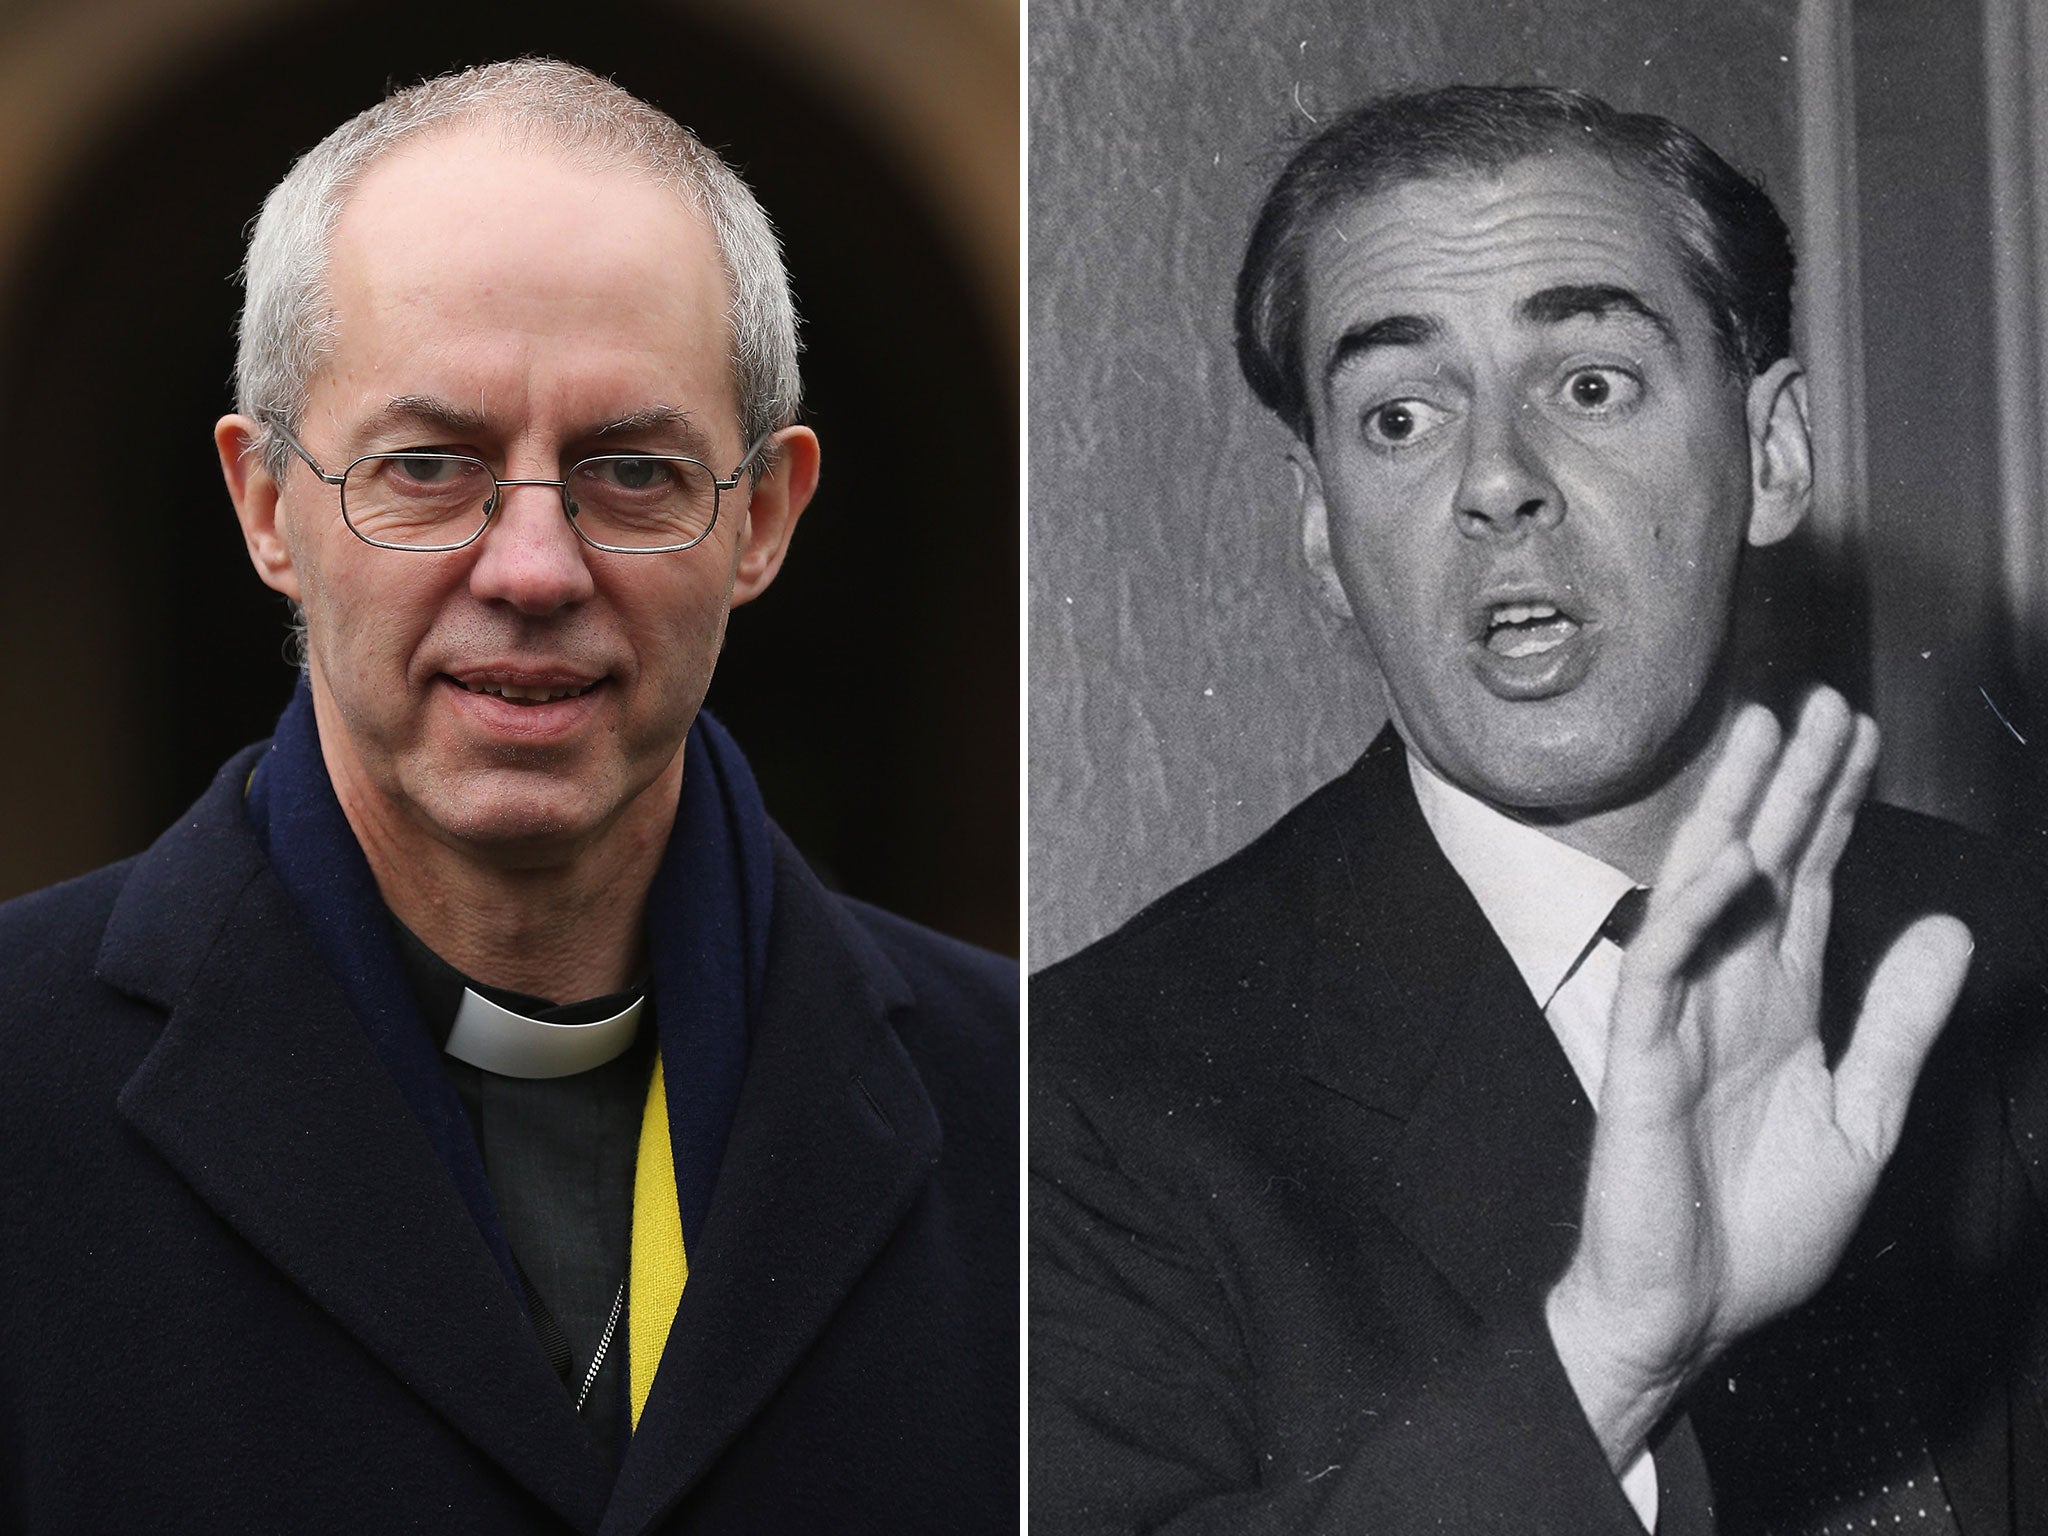 Justin Welby and his biological father, Sir Anthony Montague Browne